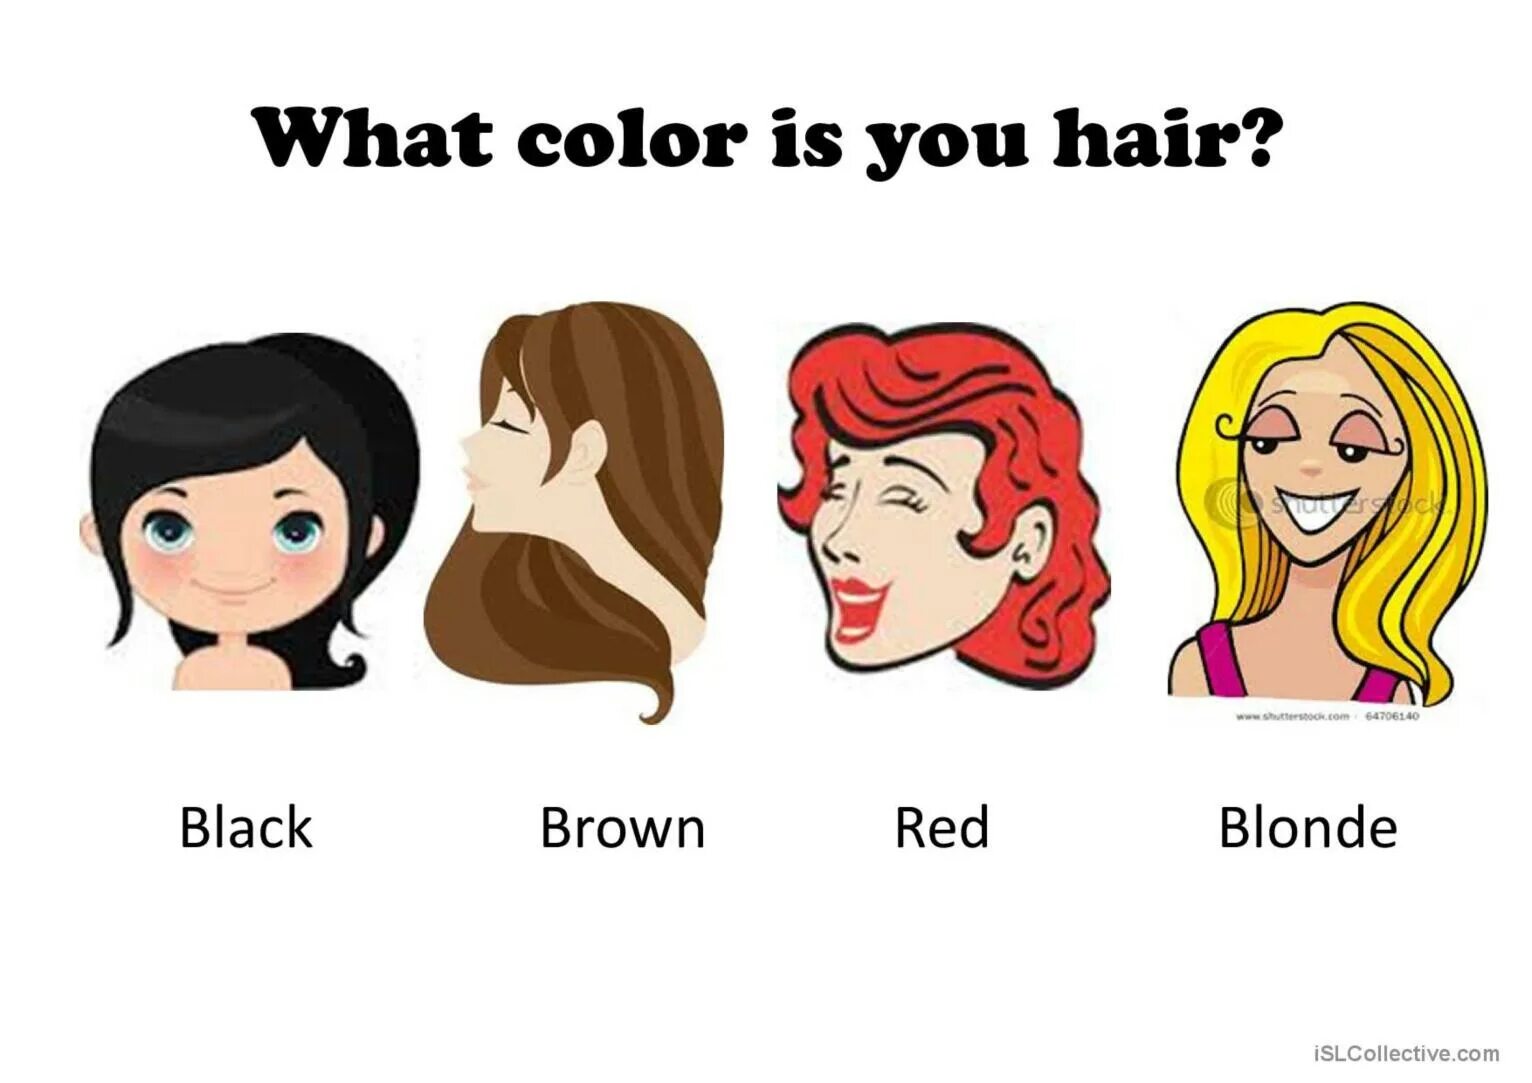 How to describe hair. Hair describe Worksheet. Hair Vocabulary for Kids. Types of hair for Kids. Светлые волосы перевод на английский